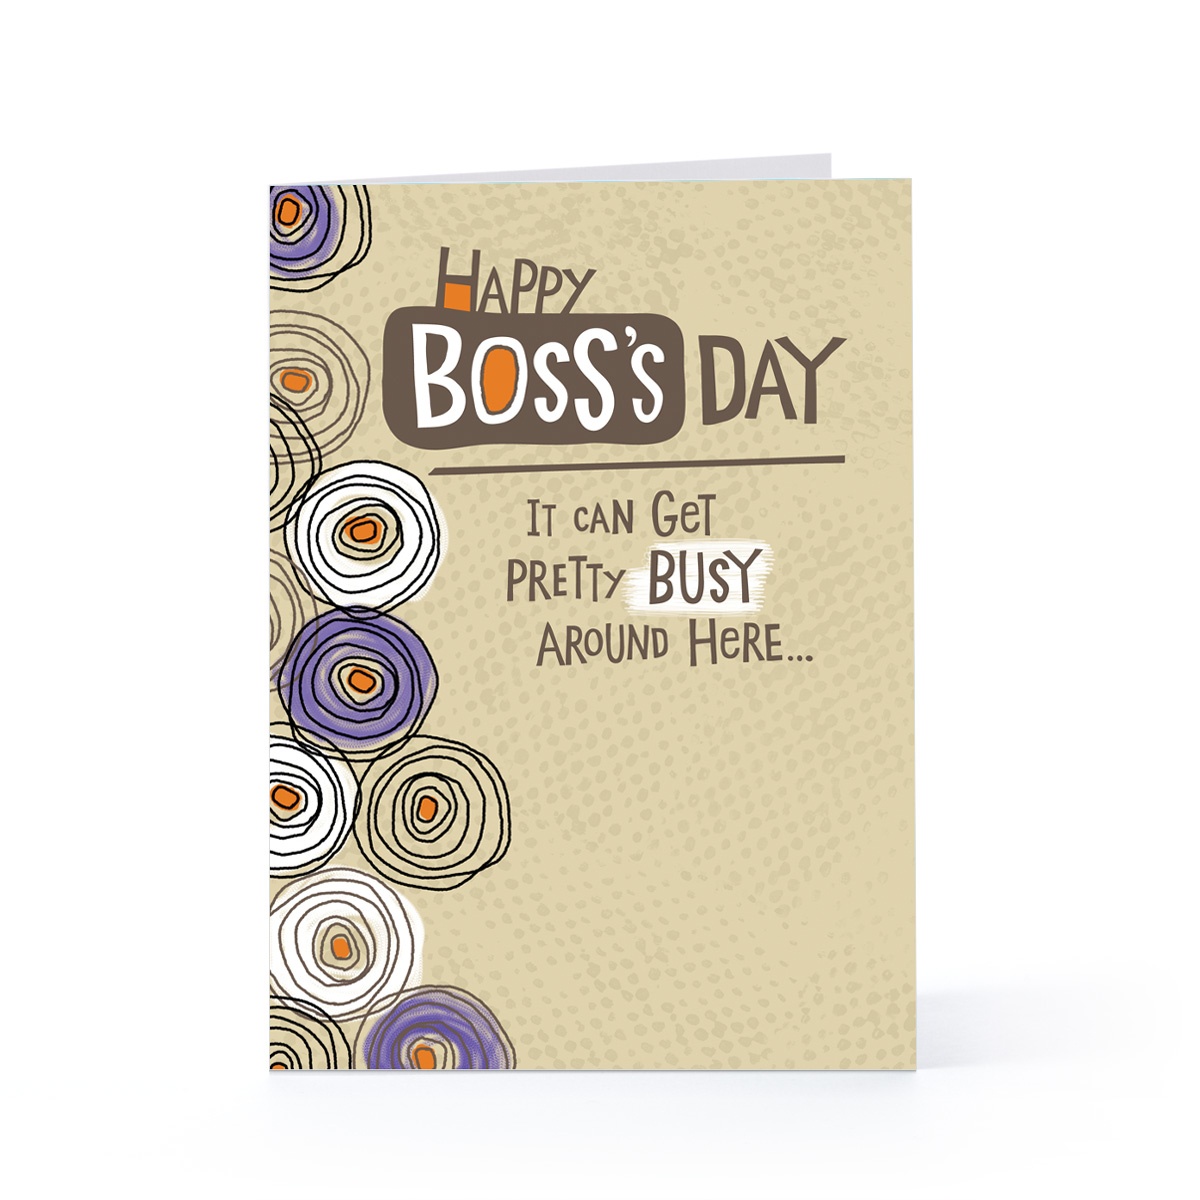 60 Most Beautiful National Boss Day 2017 Greeting Picture Ideas Free